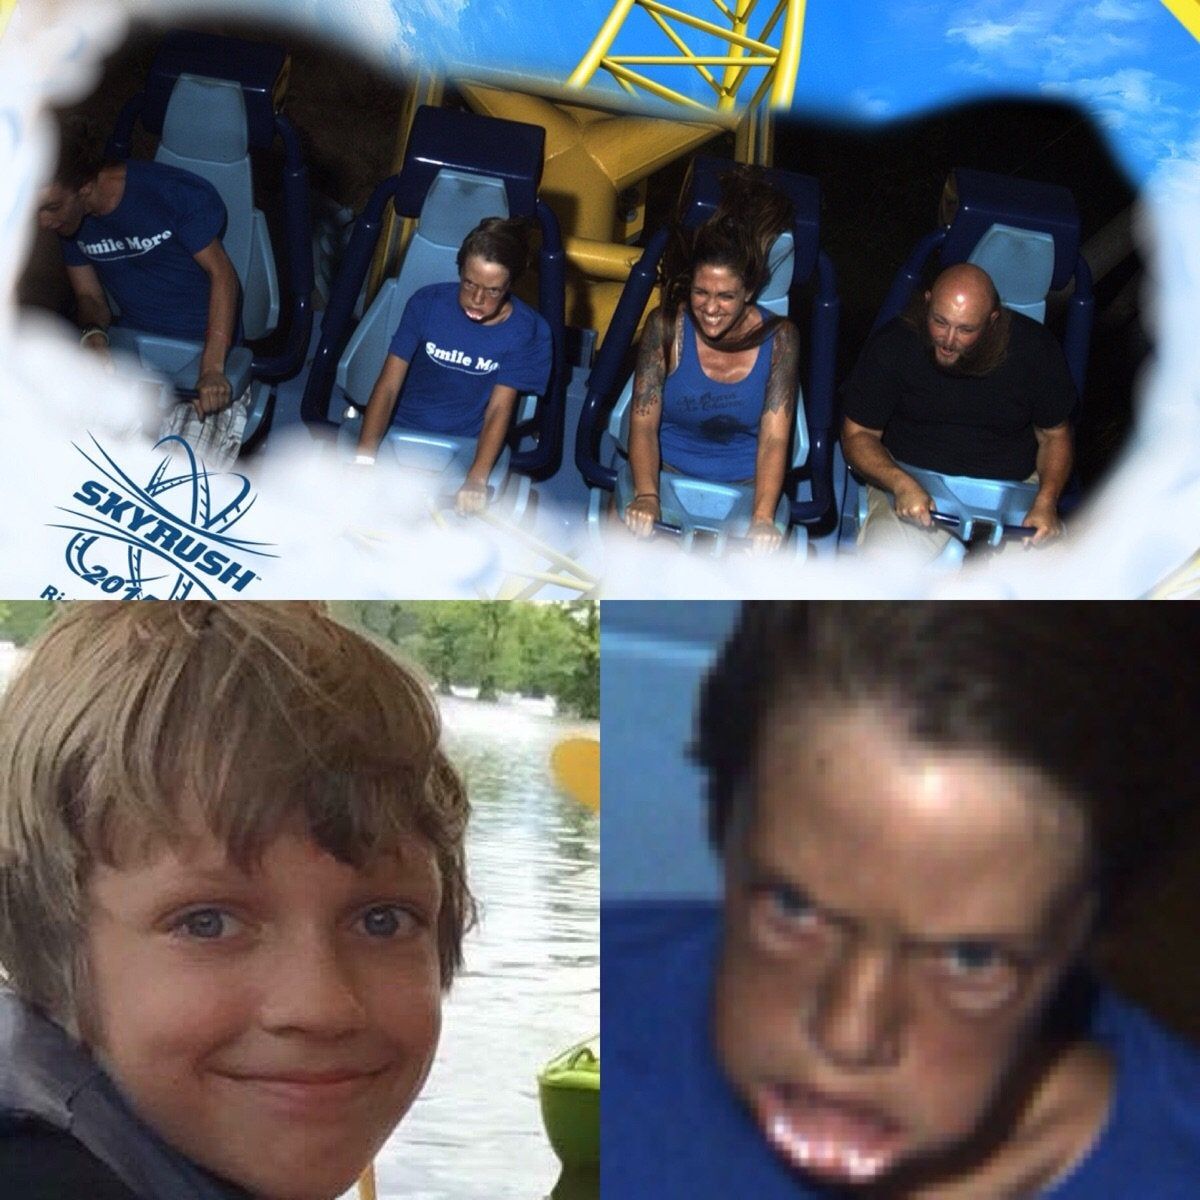 This roller coaster photo of me from 2015.